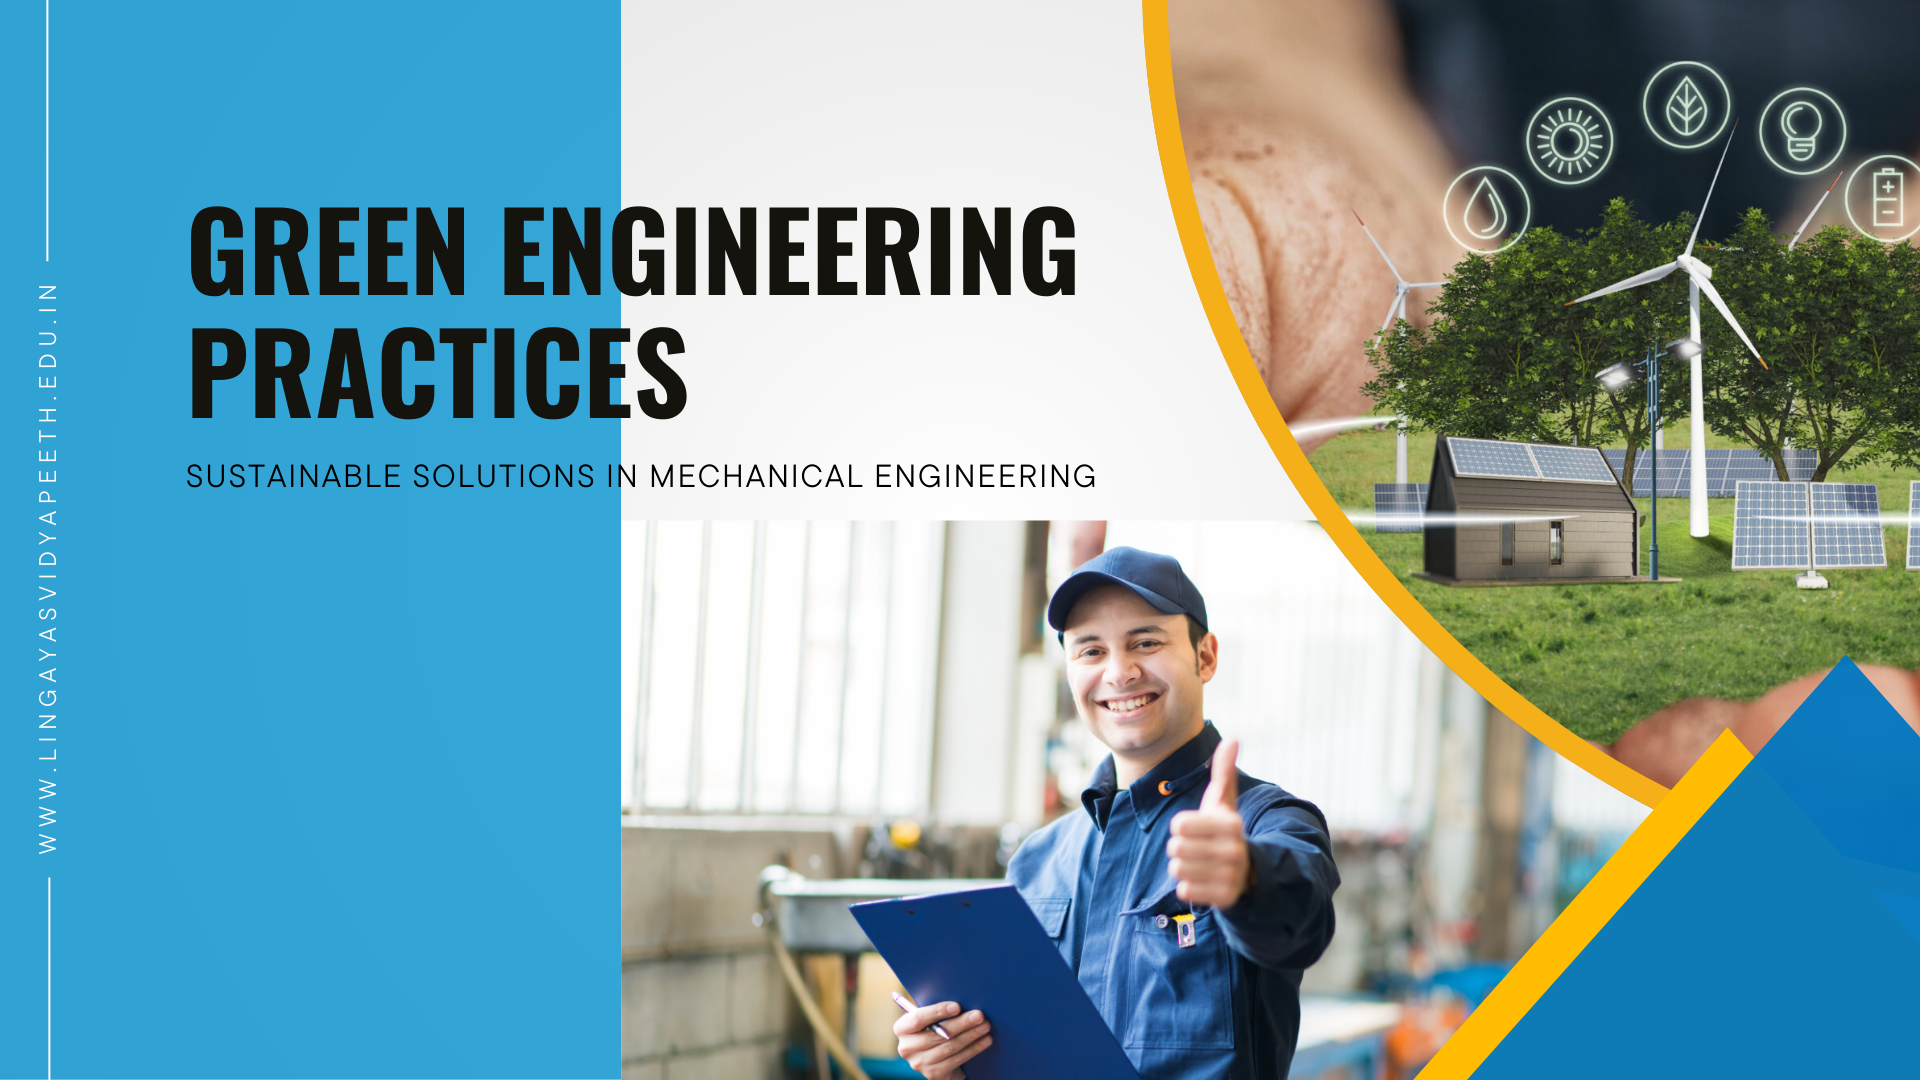 Green Engineering Practices: Sustainable Solutions in Mechanical Engineering